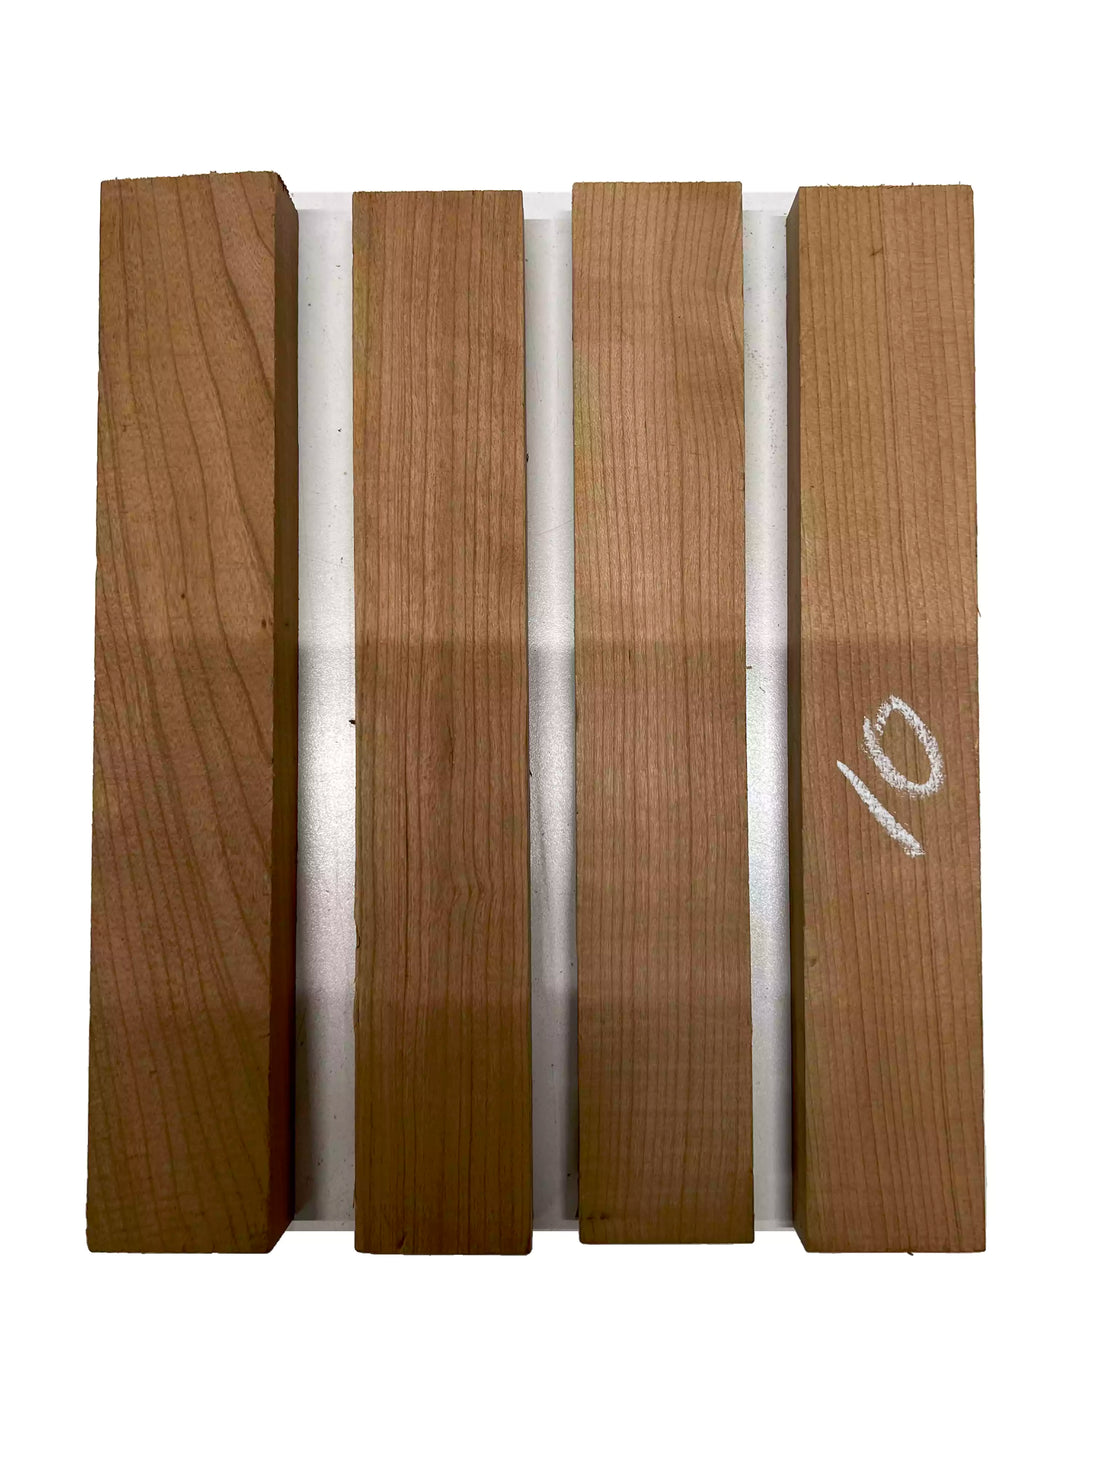 Pack of 4, Cherry Thin Stock Three Dimensional Lumber Board 12&quot; x 2&quot; x 3/4&quot; 